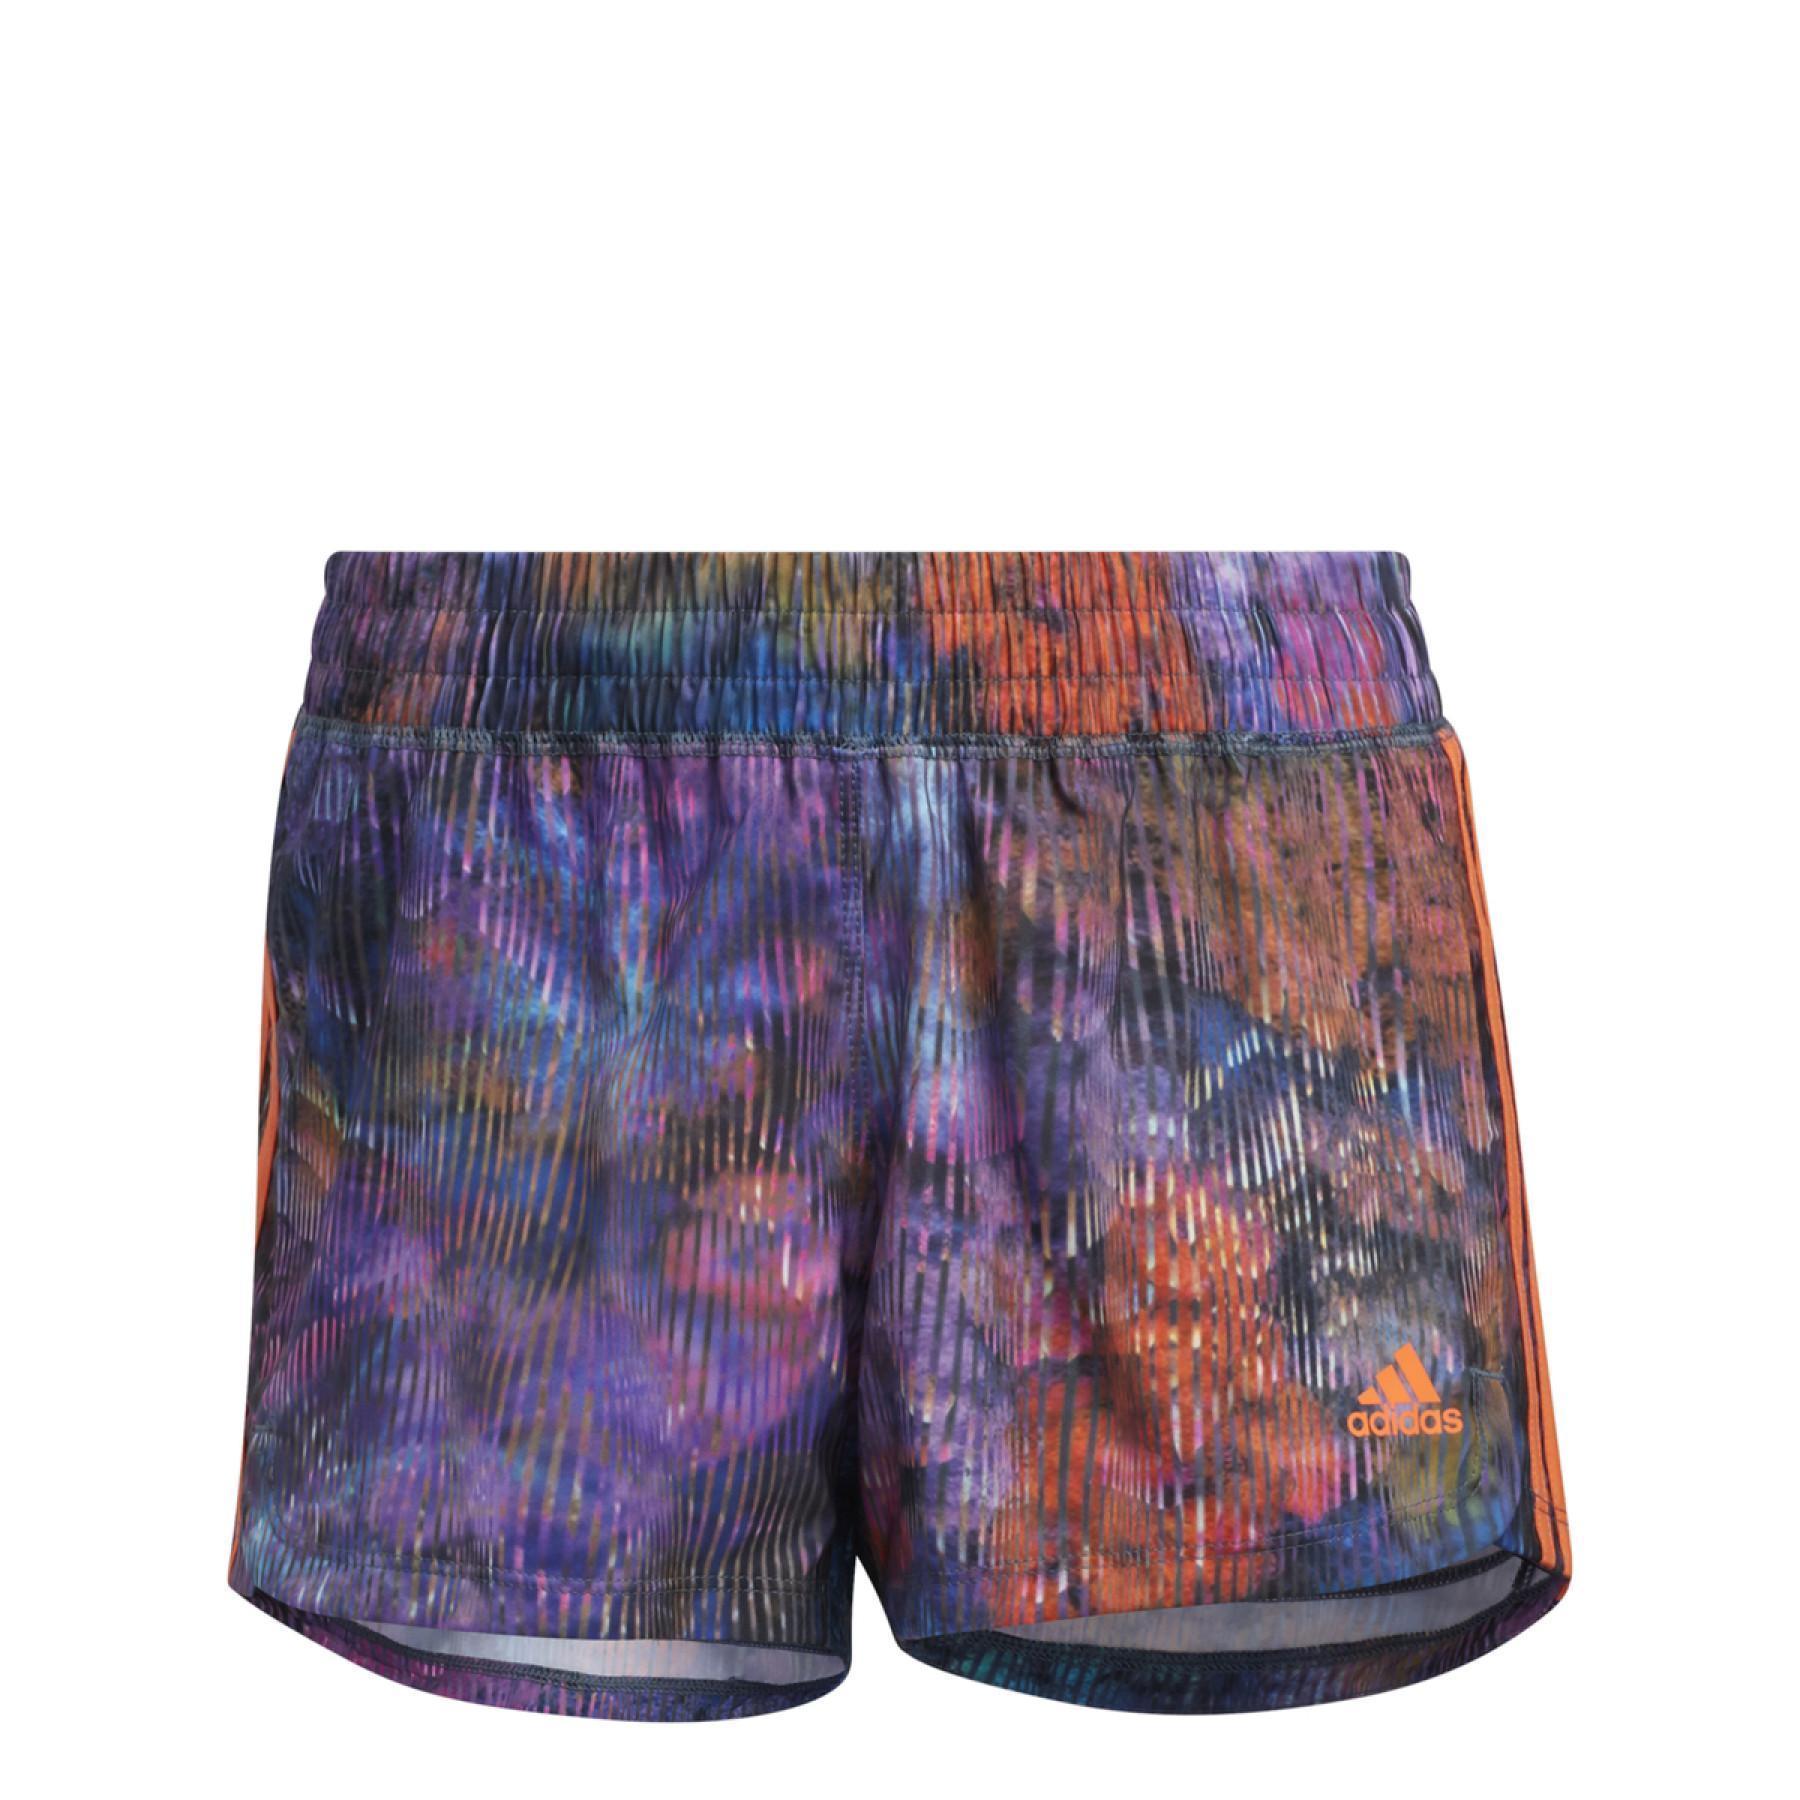 Women's shorts adidas 3S Woven Pacer Floral